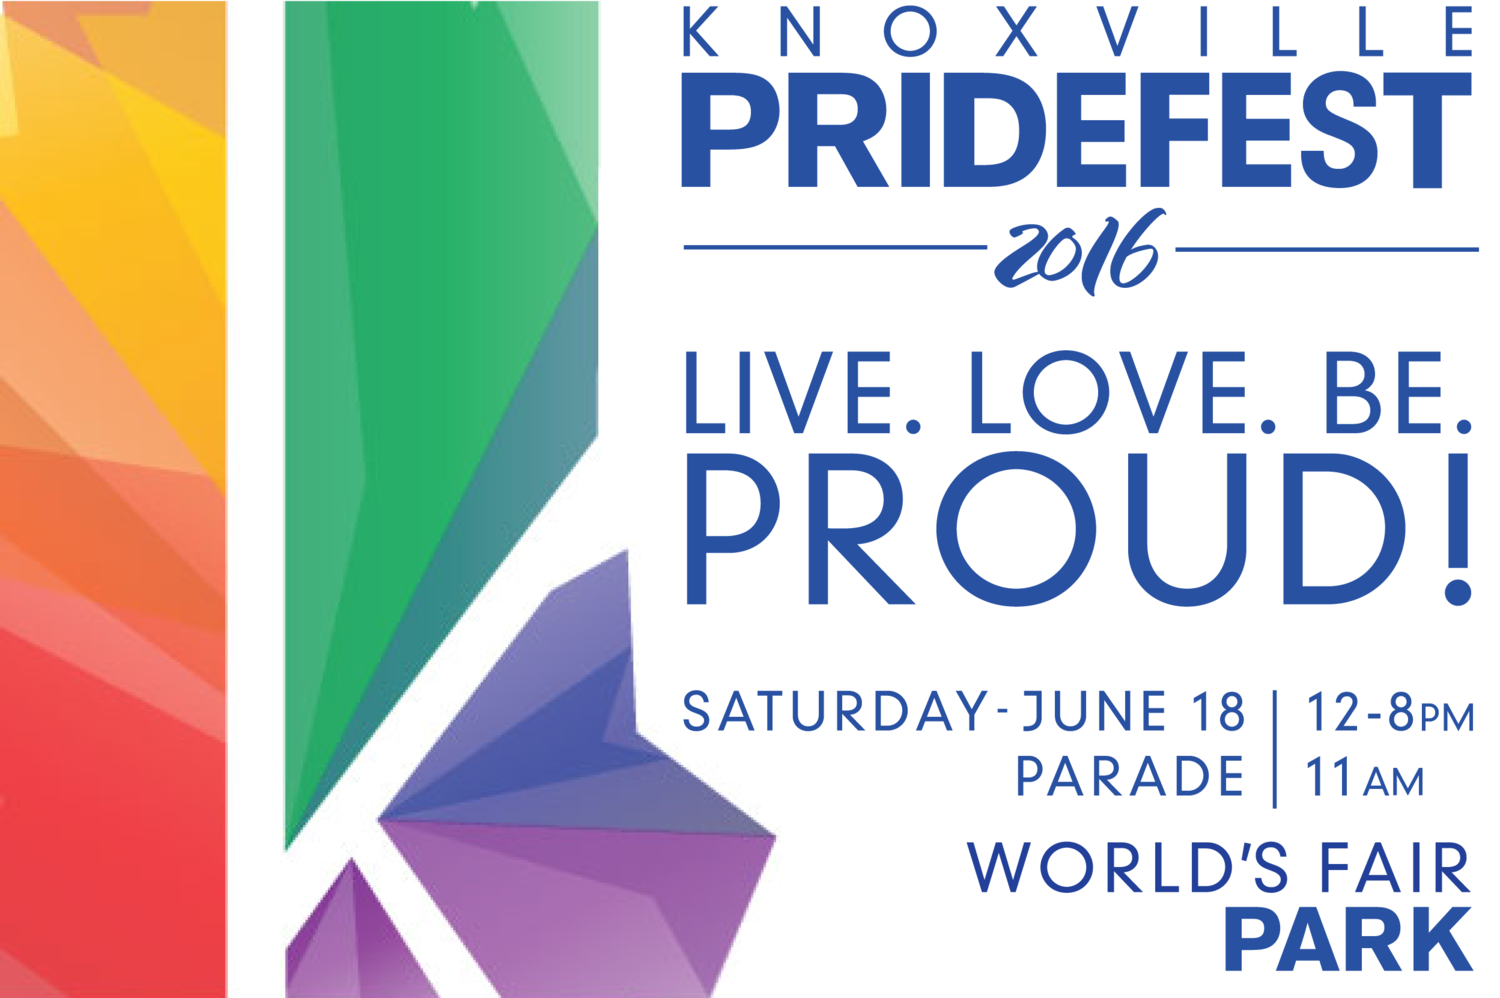 Knoxville PrideFest